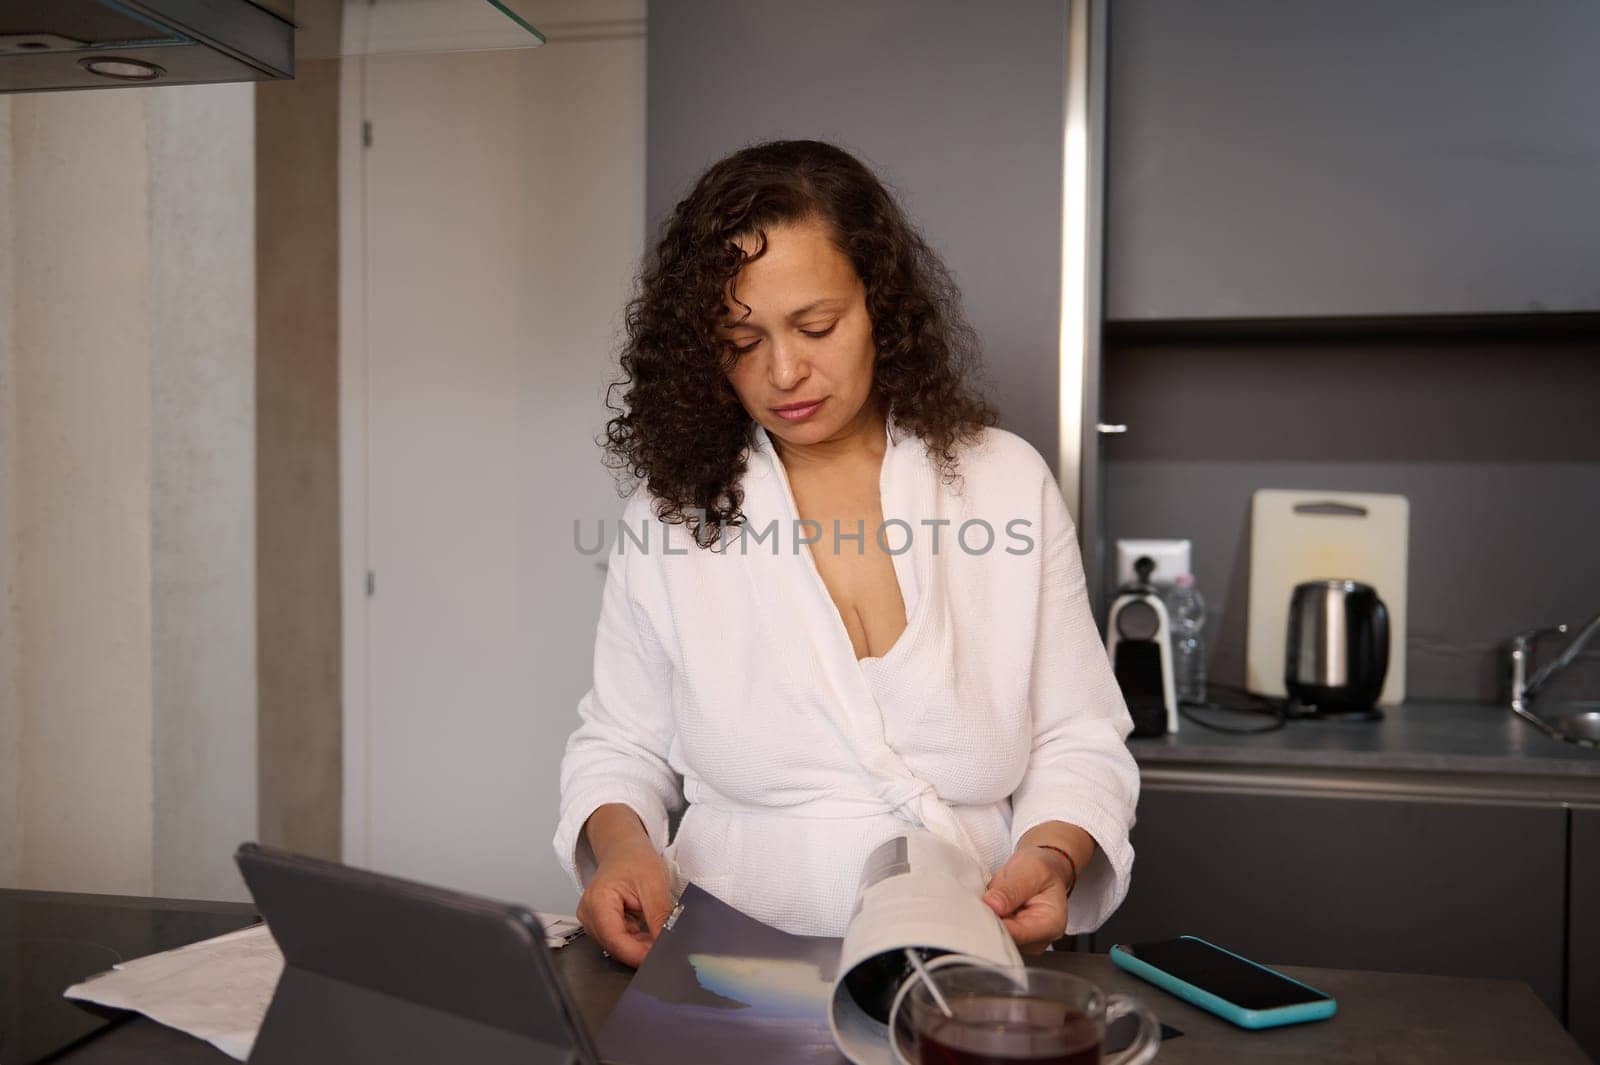 Multi ethnic young pretty woman analyzing the expenses and costs for paying bills, standing at desk at home with documents in hands. Finance and home management concept, planning budget.